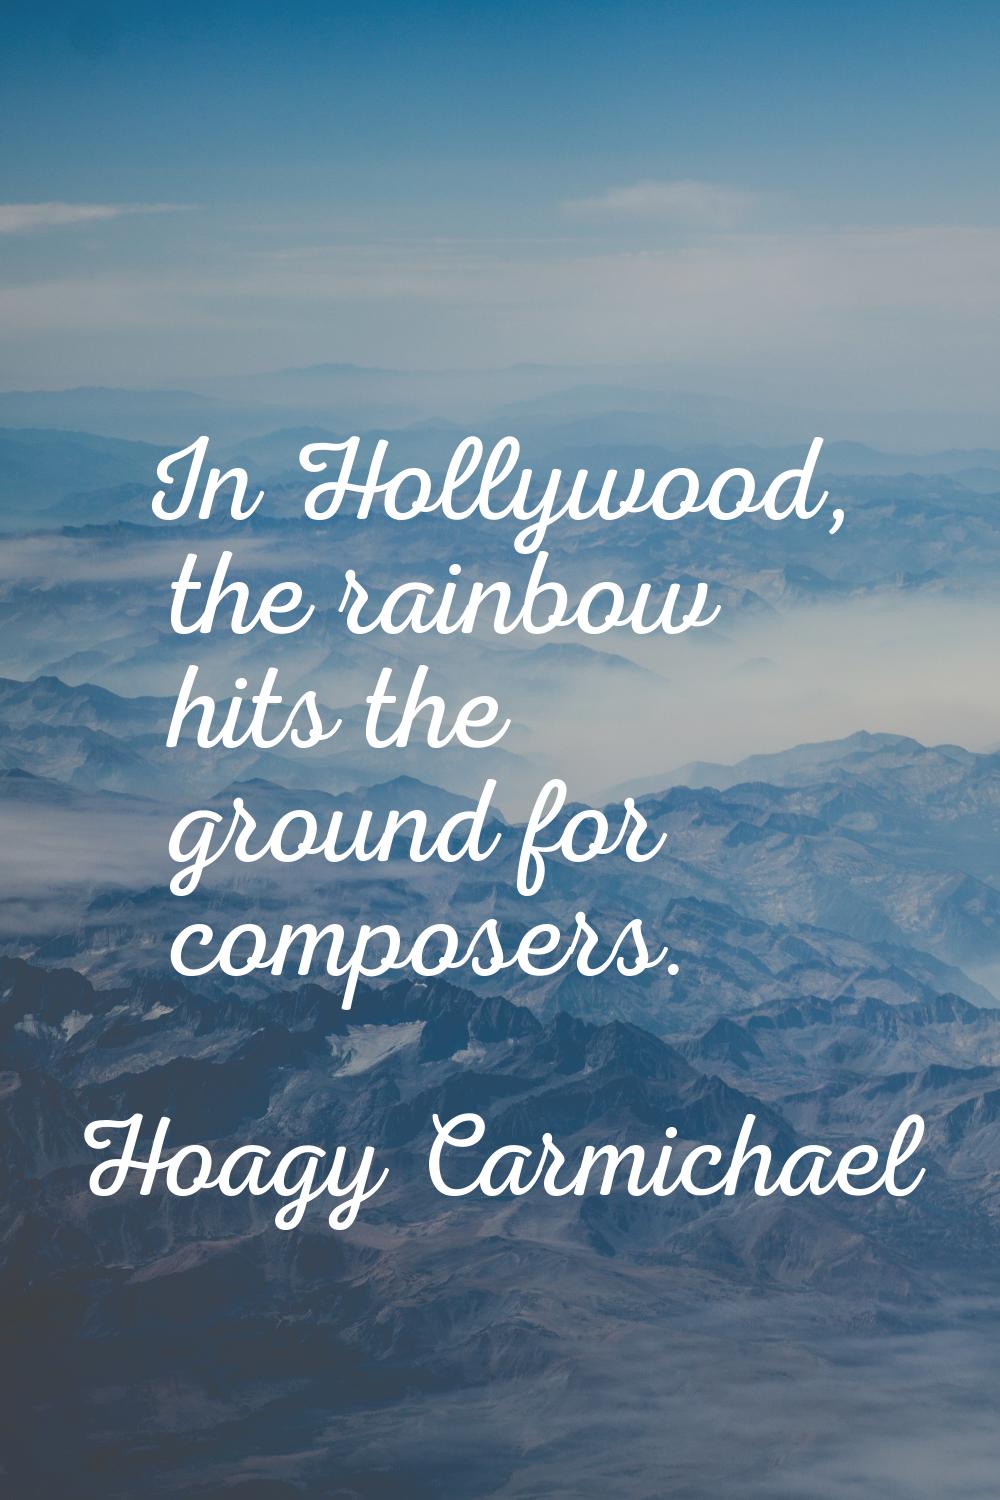 In Hollywood, the rainbow hits the ground for composers.